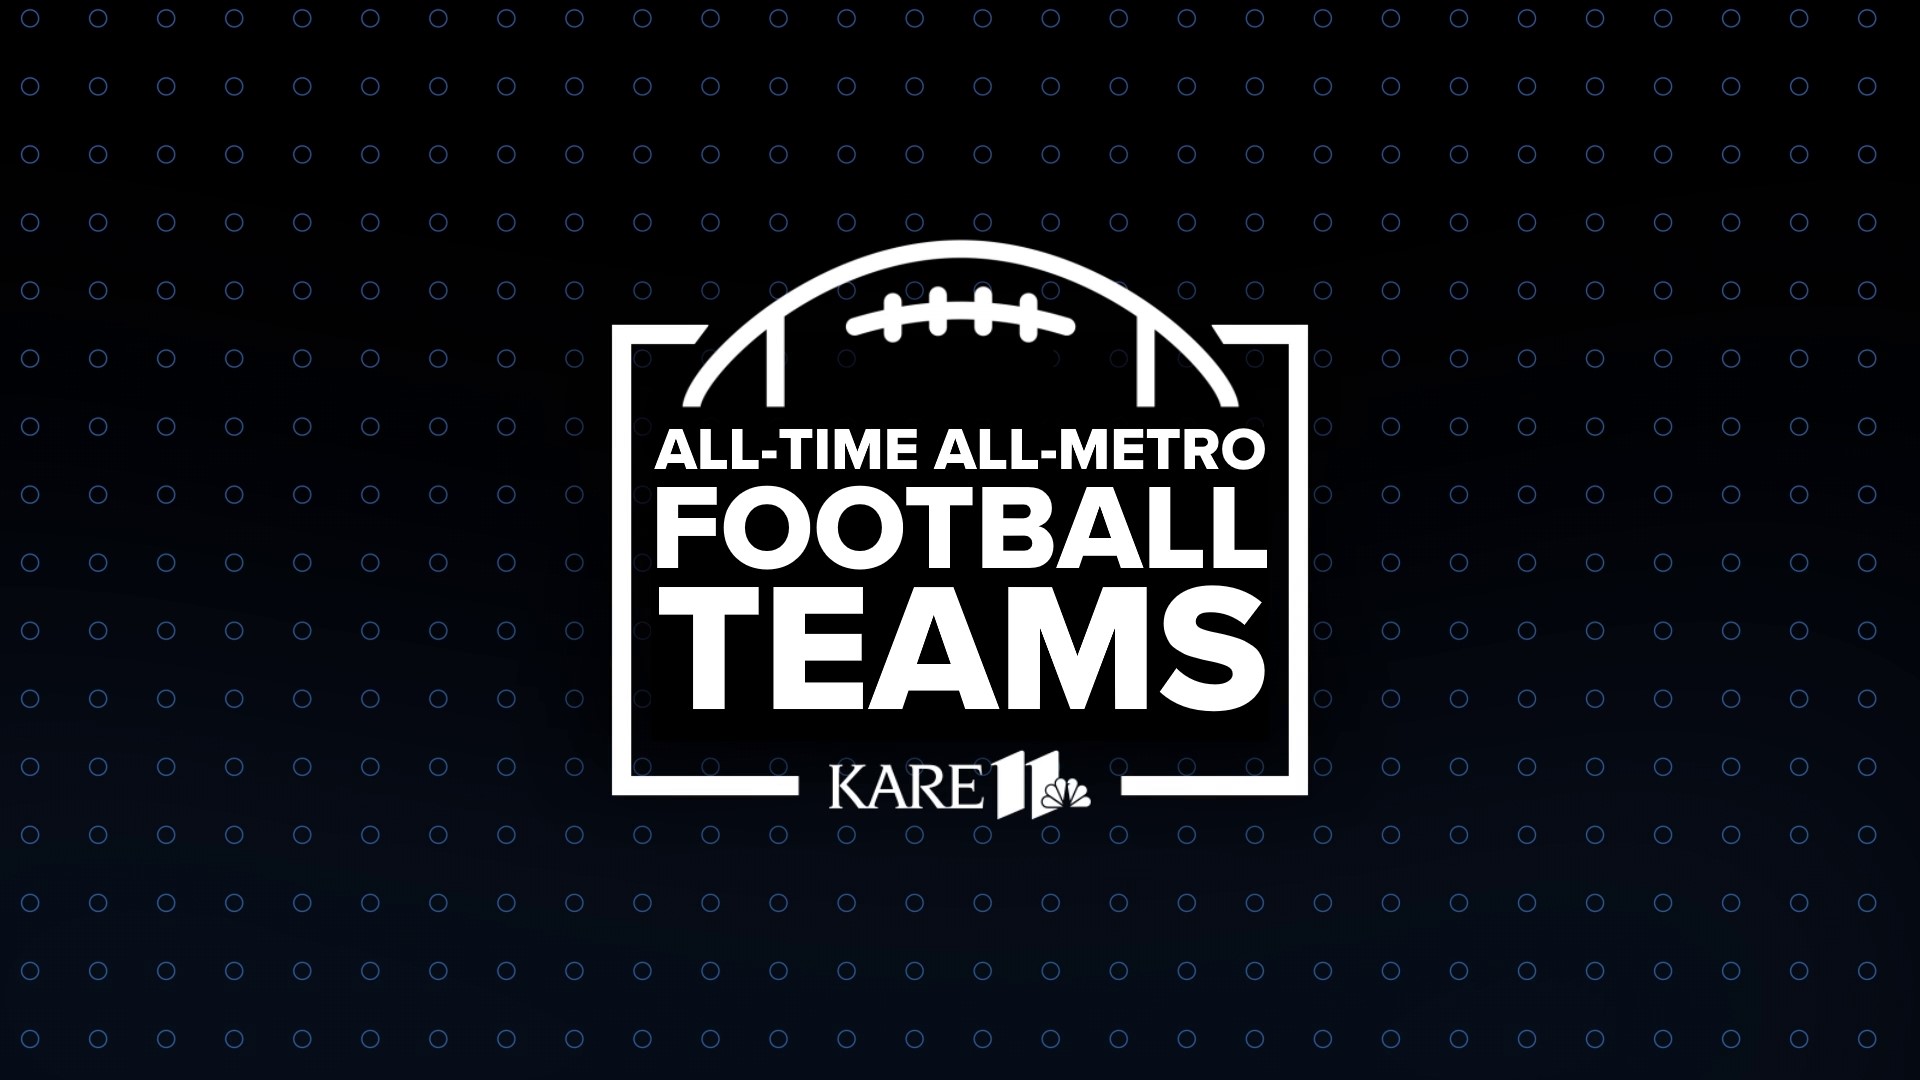 For the first time, all of Randy's All-Metro team announcement videos have been collected in one place on the KARE 11 YouTube page.